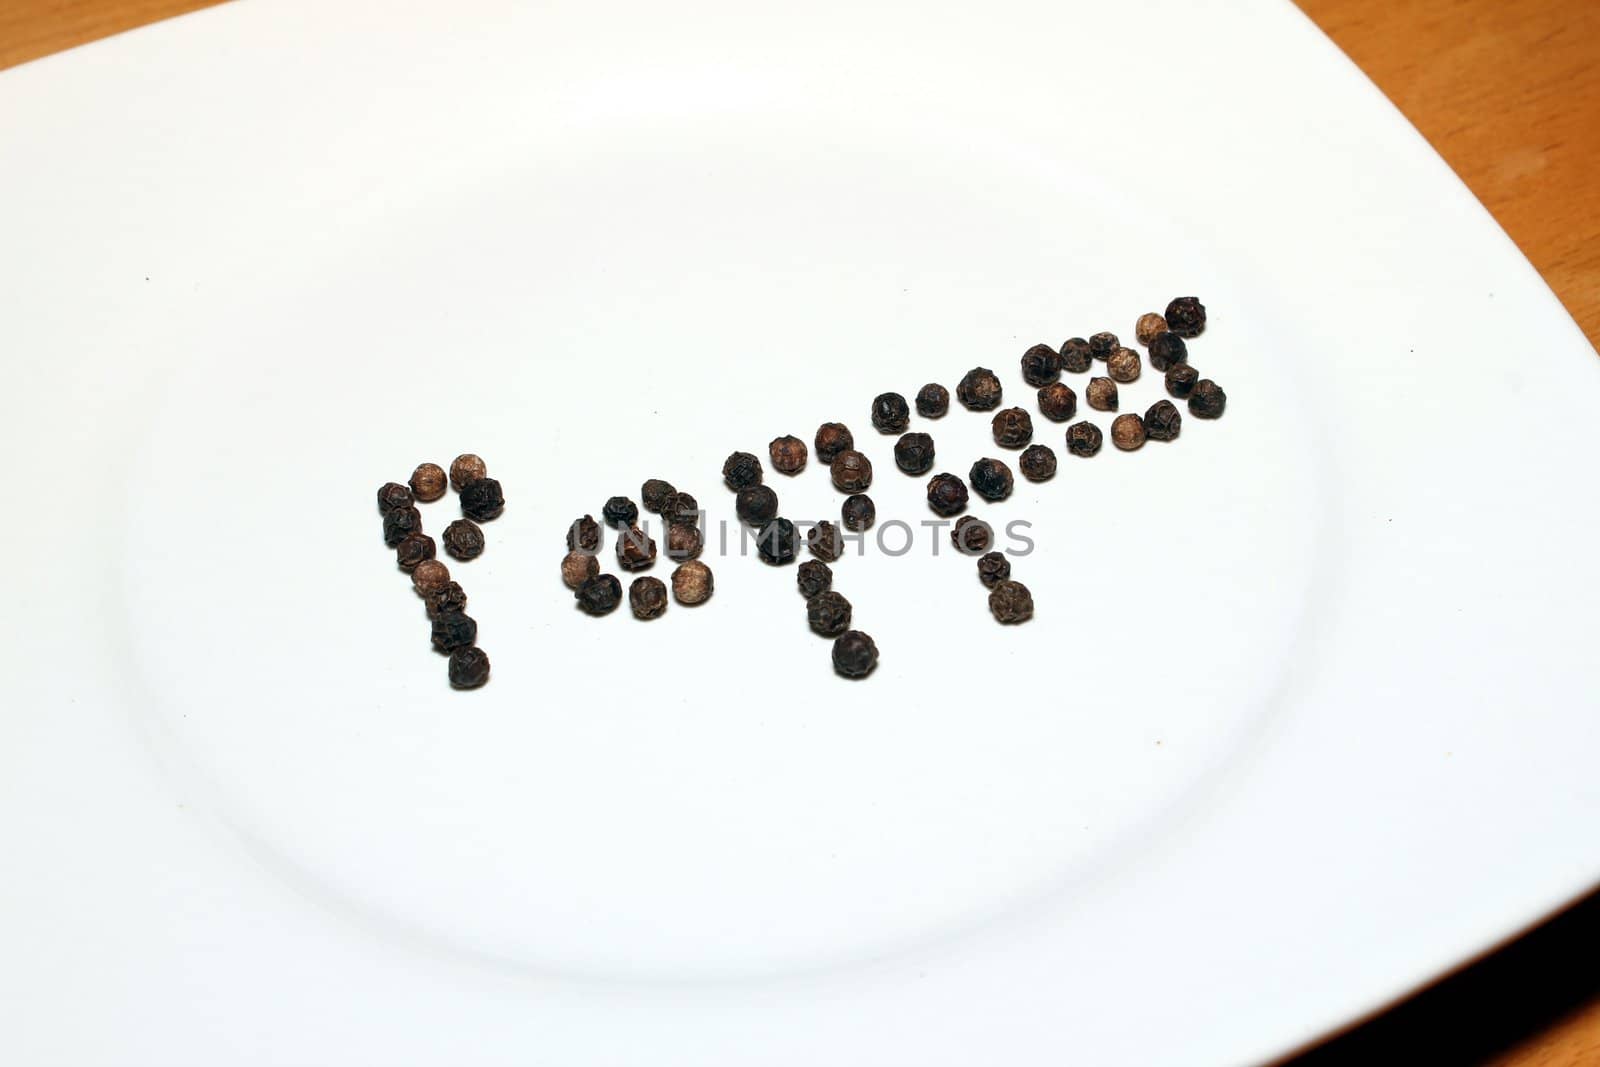 pepper text on a plate